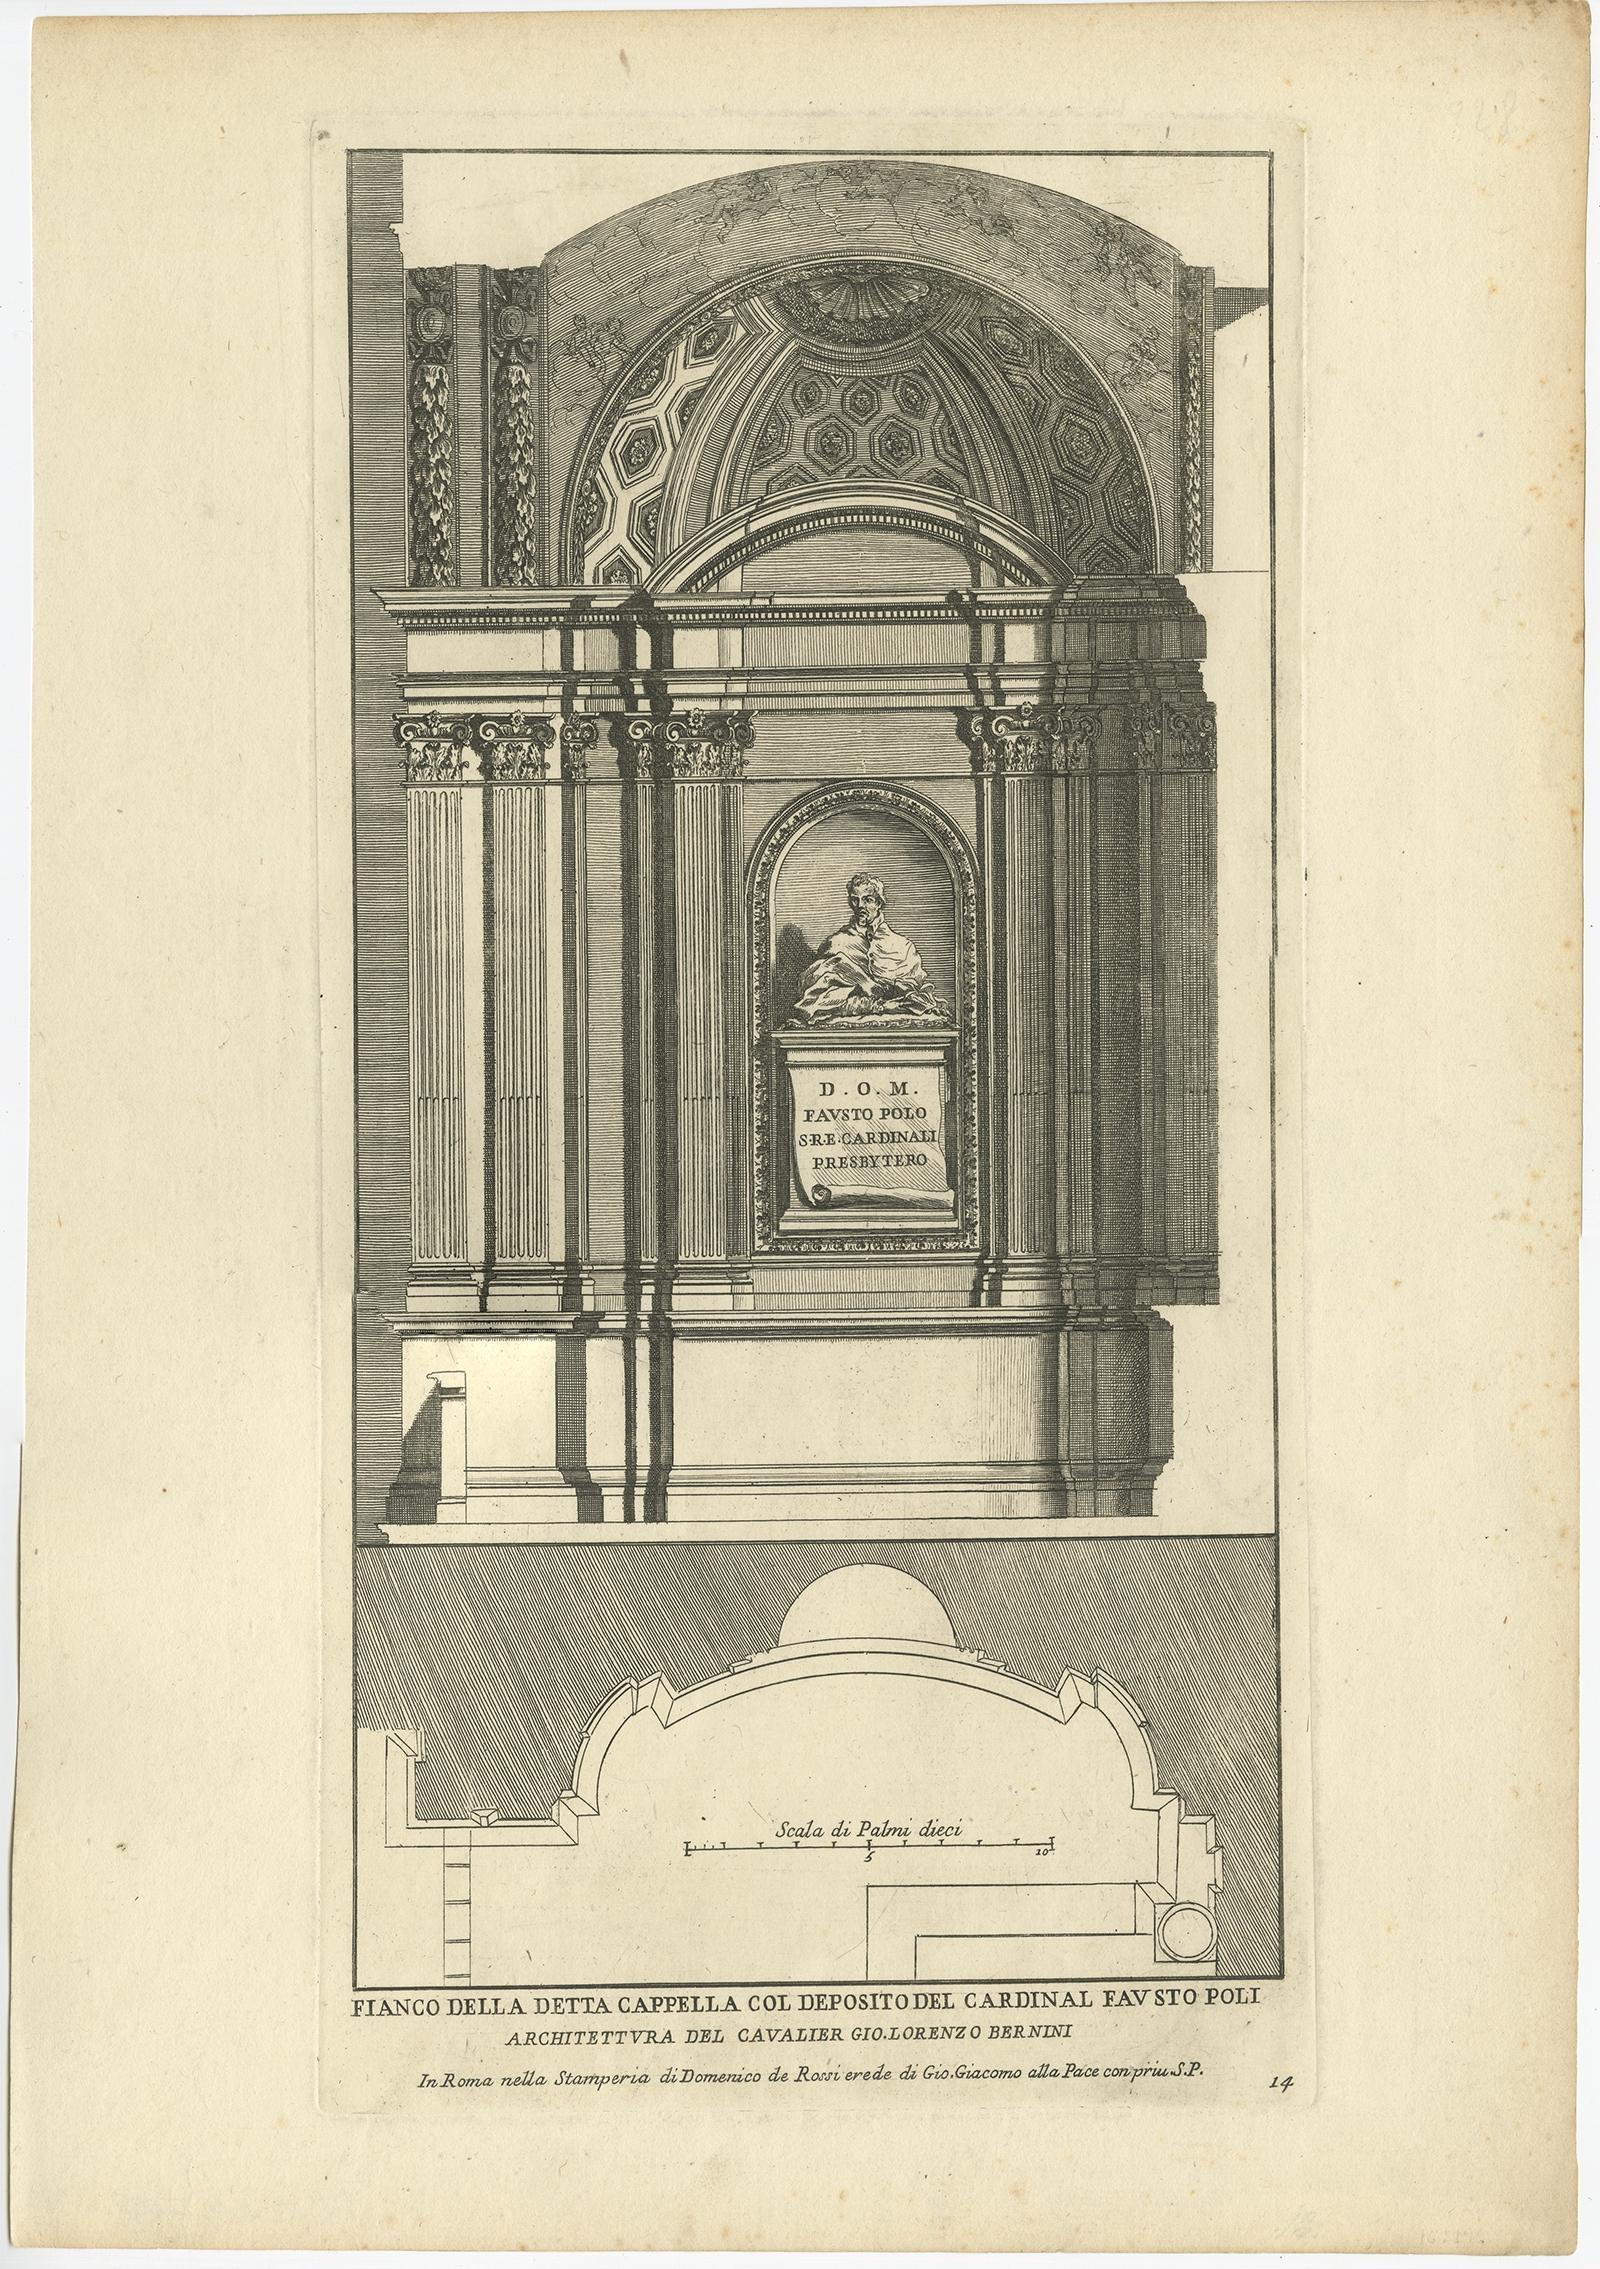 Paper Antique Print of the Monument to Fauso Poli, San Crisogono, Rome, Italy, c.1710